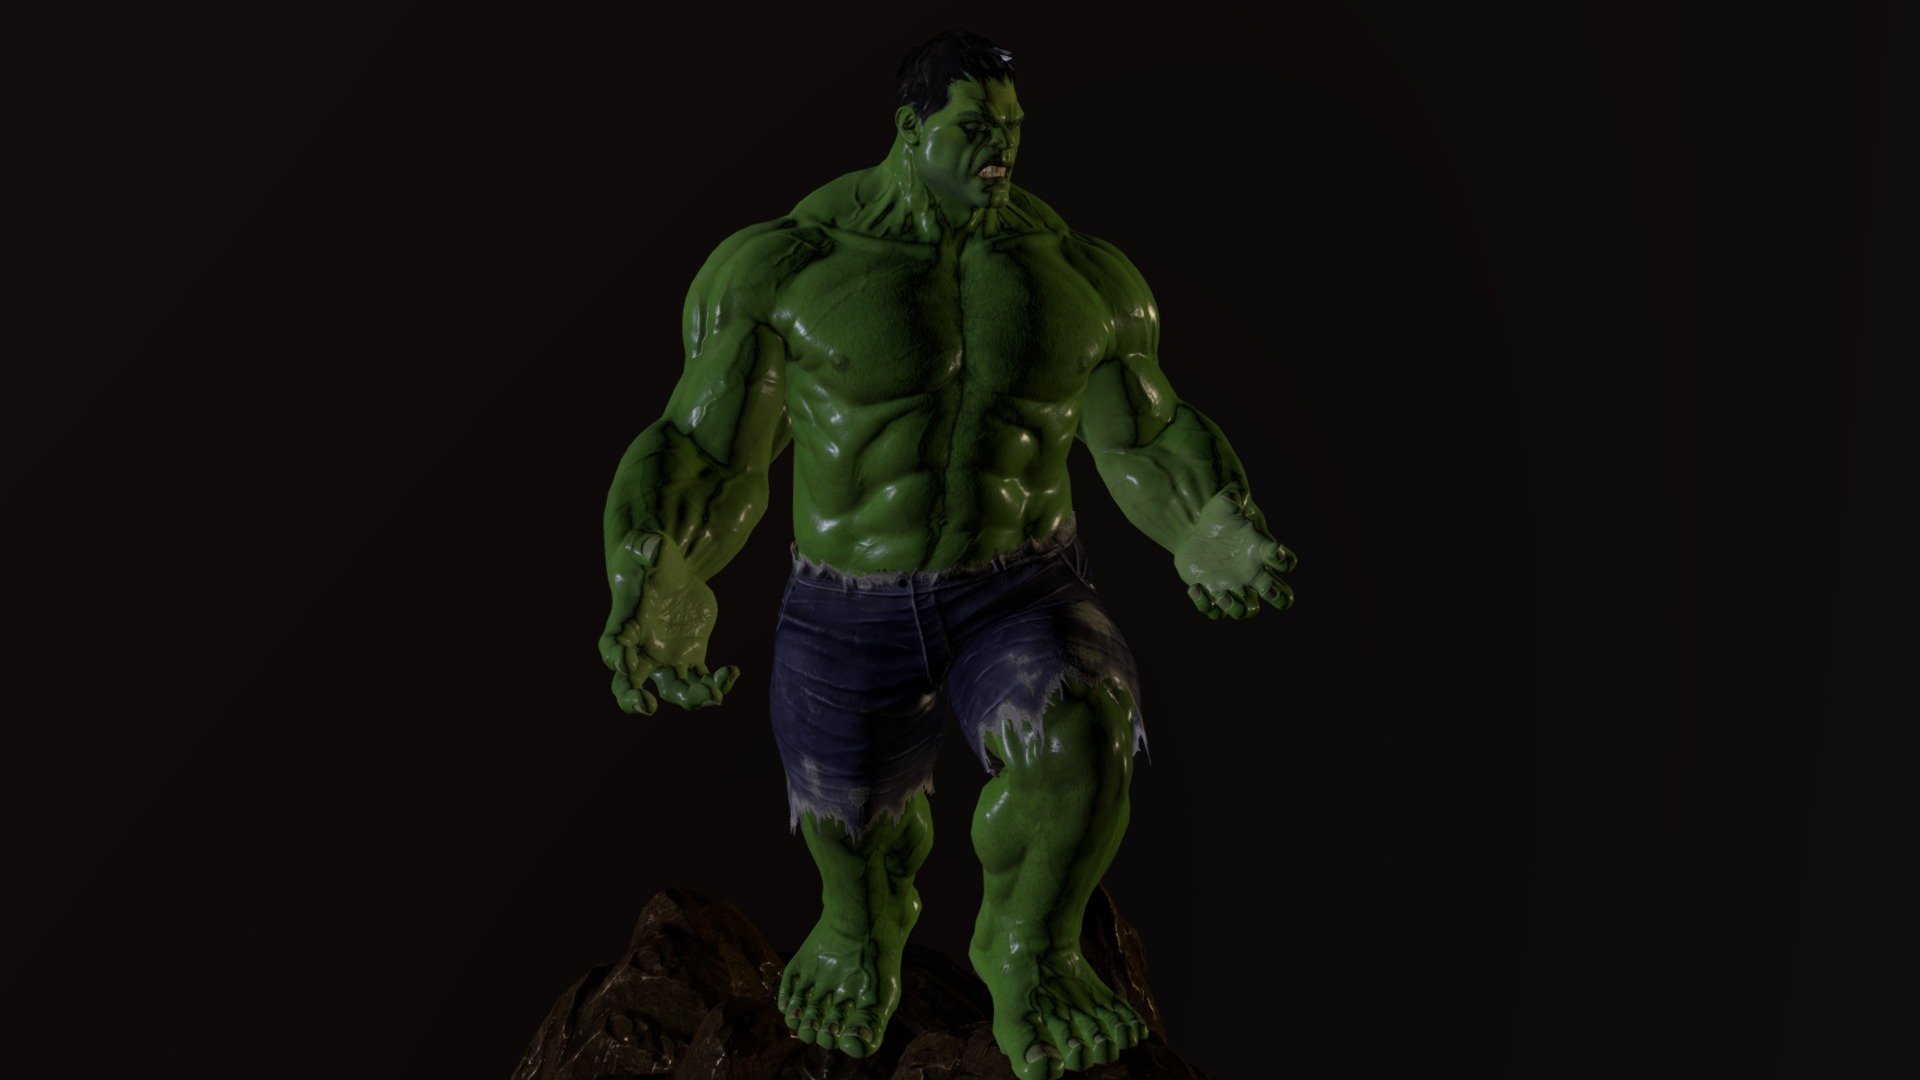 This is the Hulk model I made for Marvel Powers United VR here at Sanzaru Games. What an incredibly fun and challenging project to work on! Made with Zbrush, Maya, and Substance Painter. The rocks used for the base were made by my awesome co-worker, anes 3d model